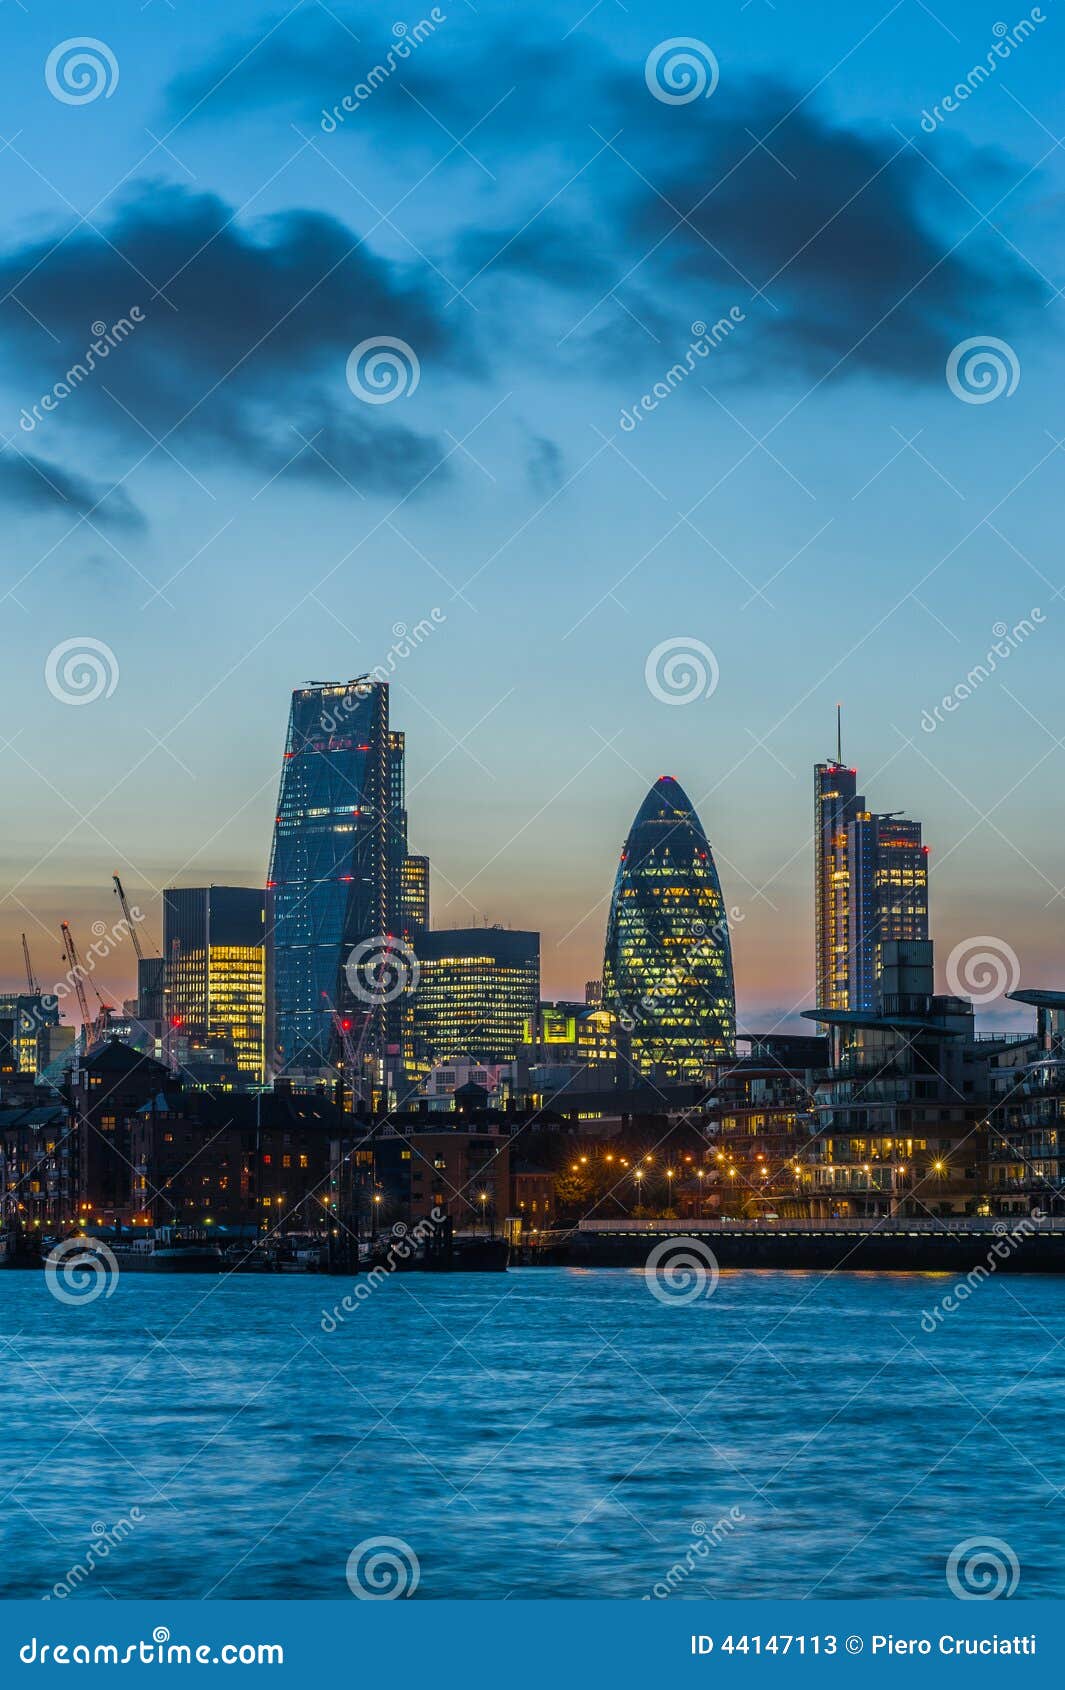 new skyscrapers of the city of london at sunset 2014